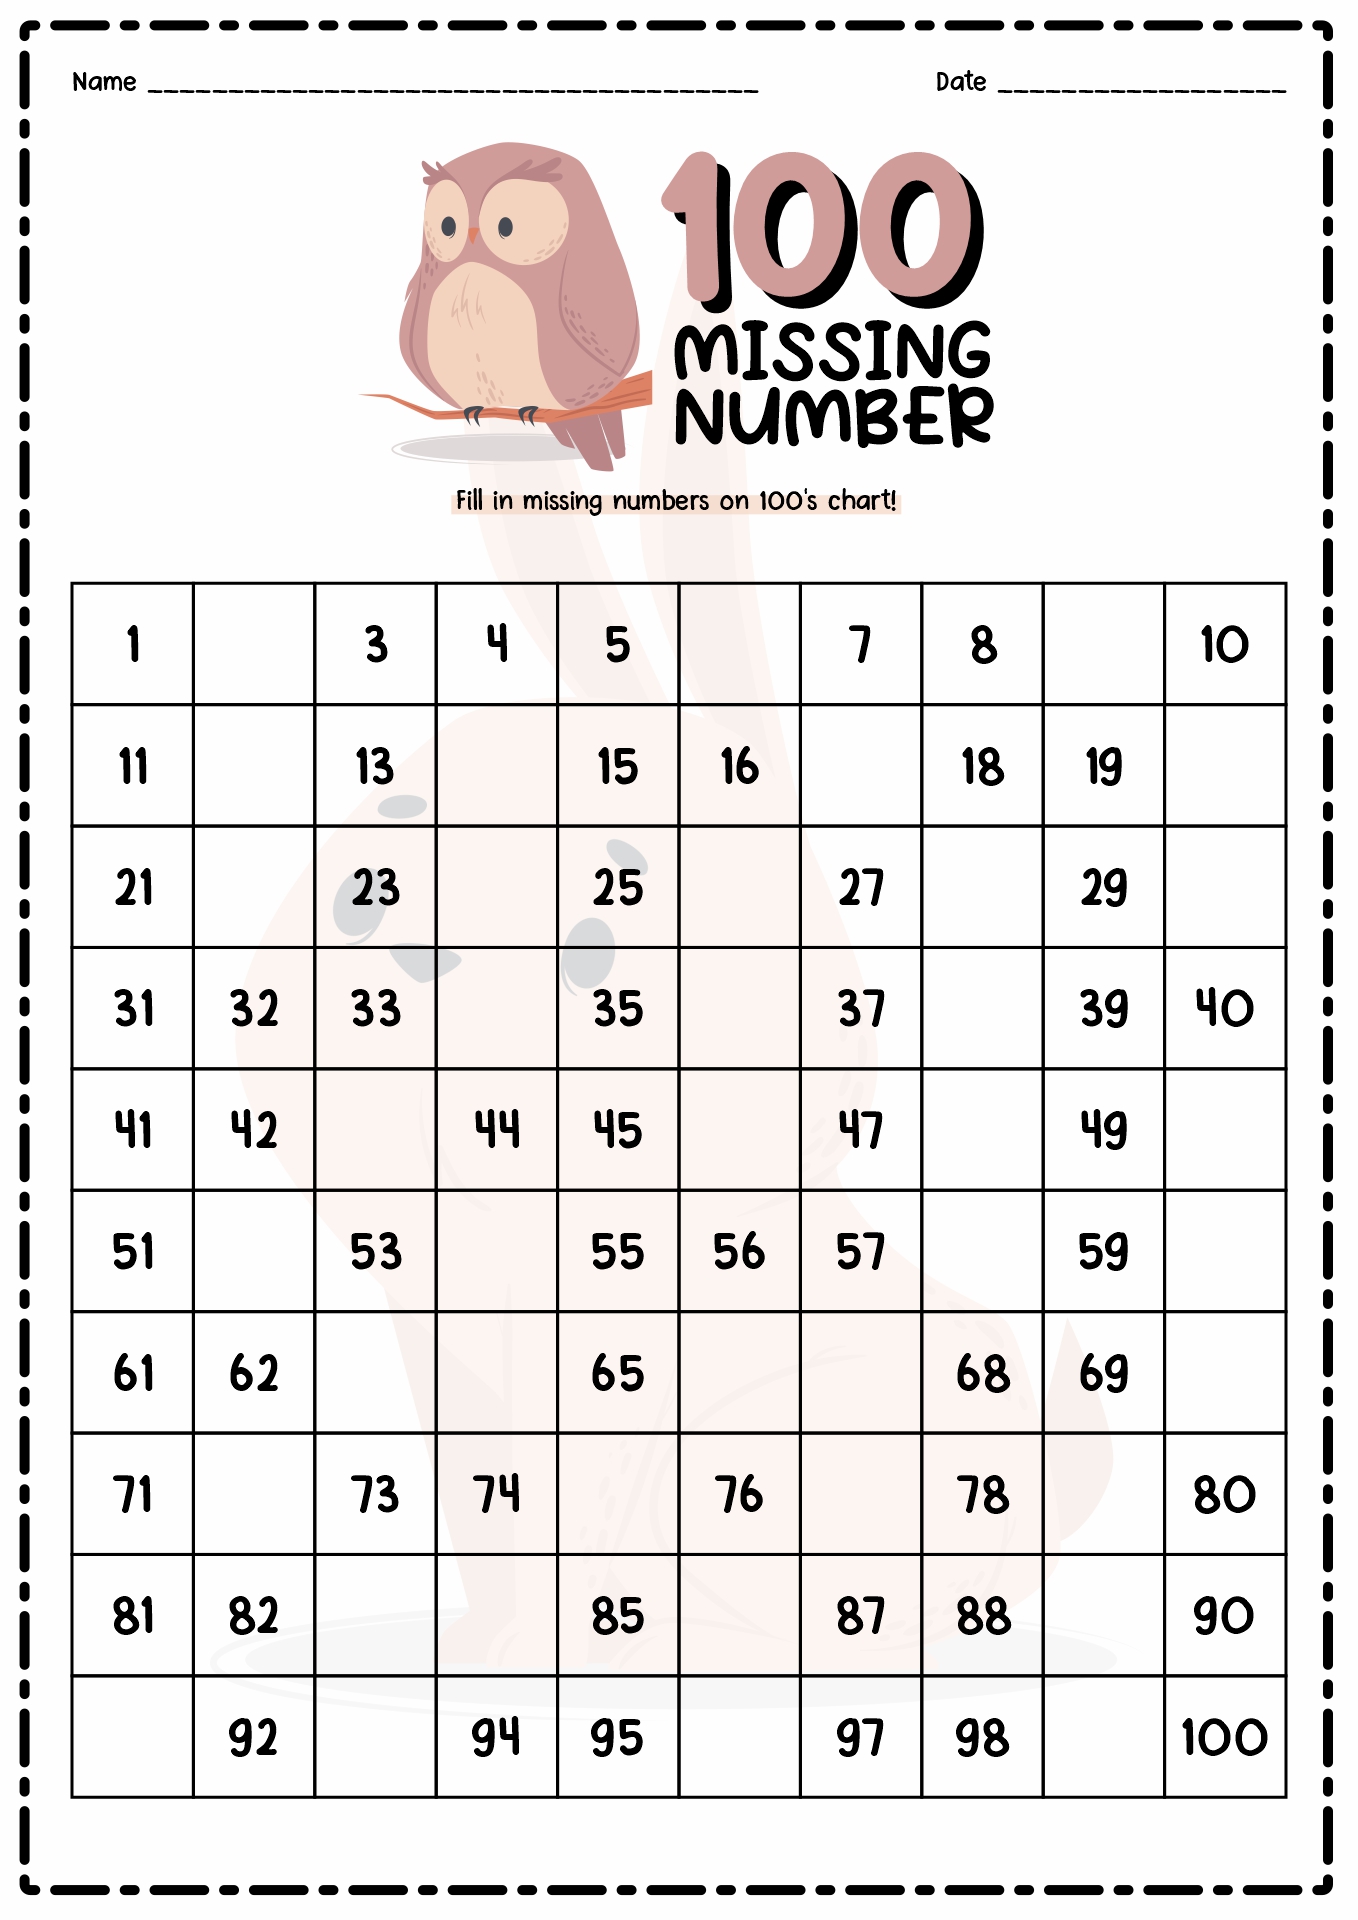 12-best-images-of-hundreds-square-worksheet-missing-puzzle-with